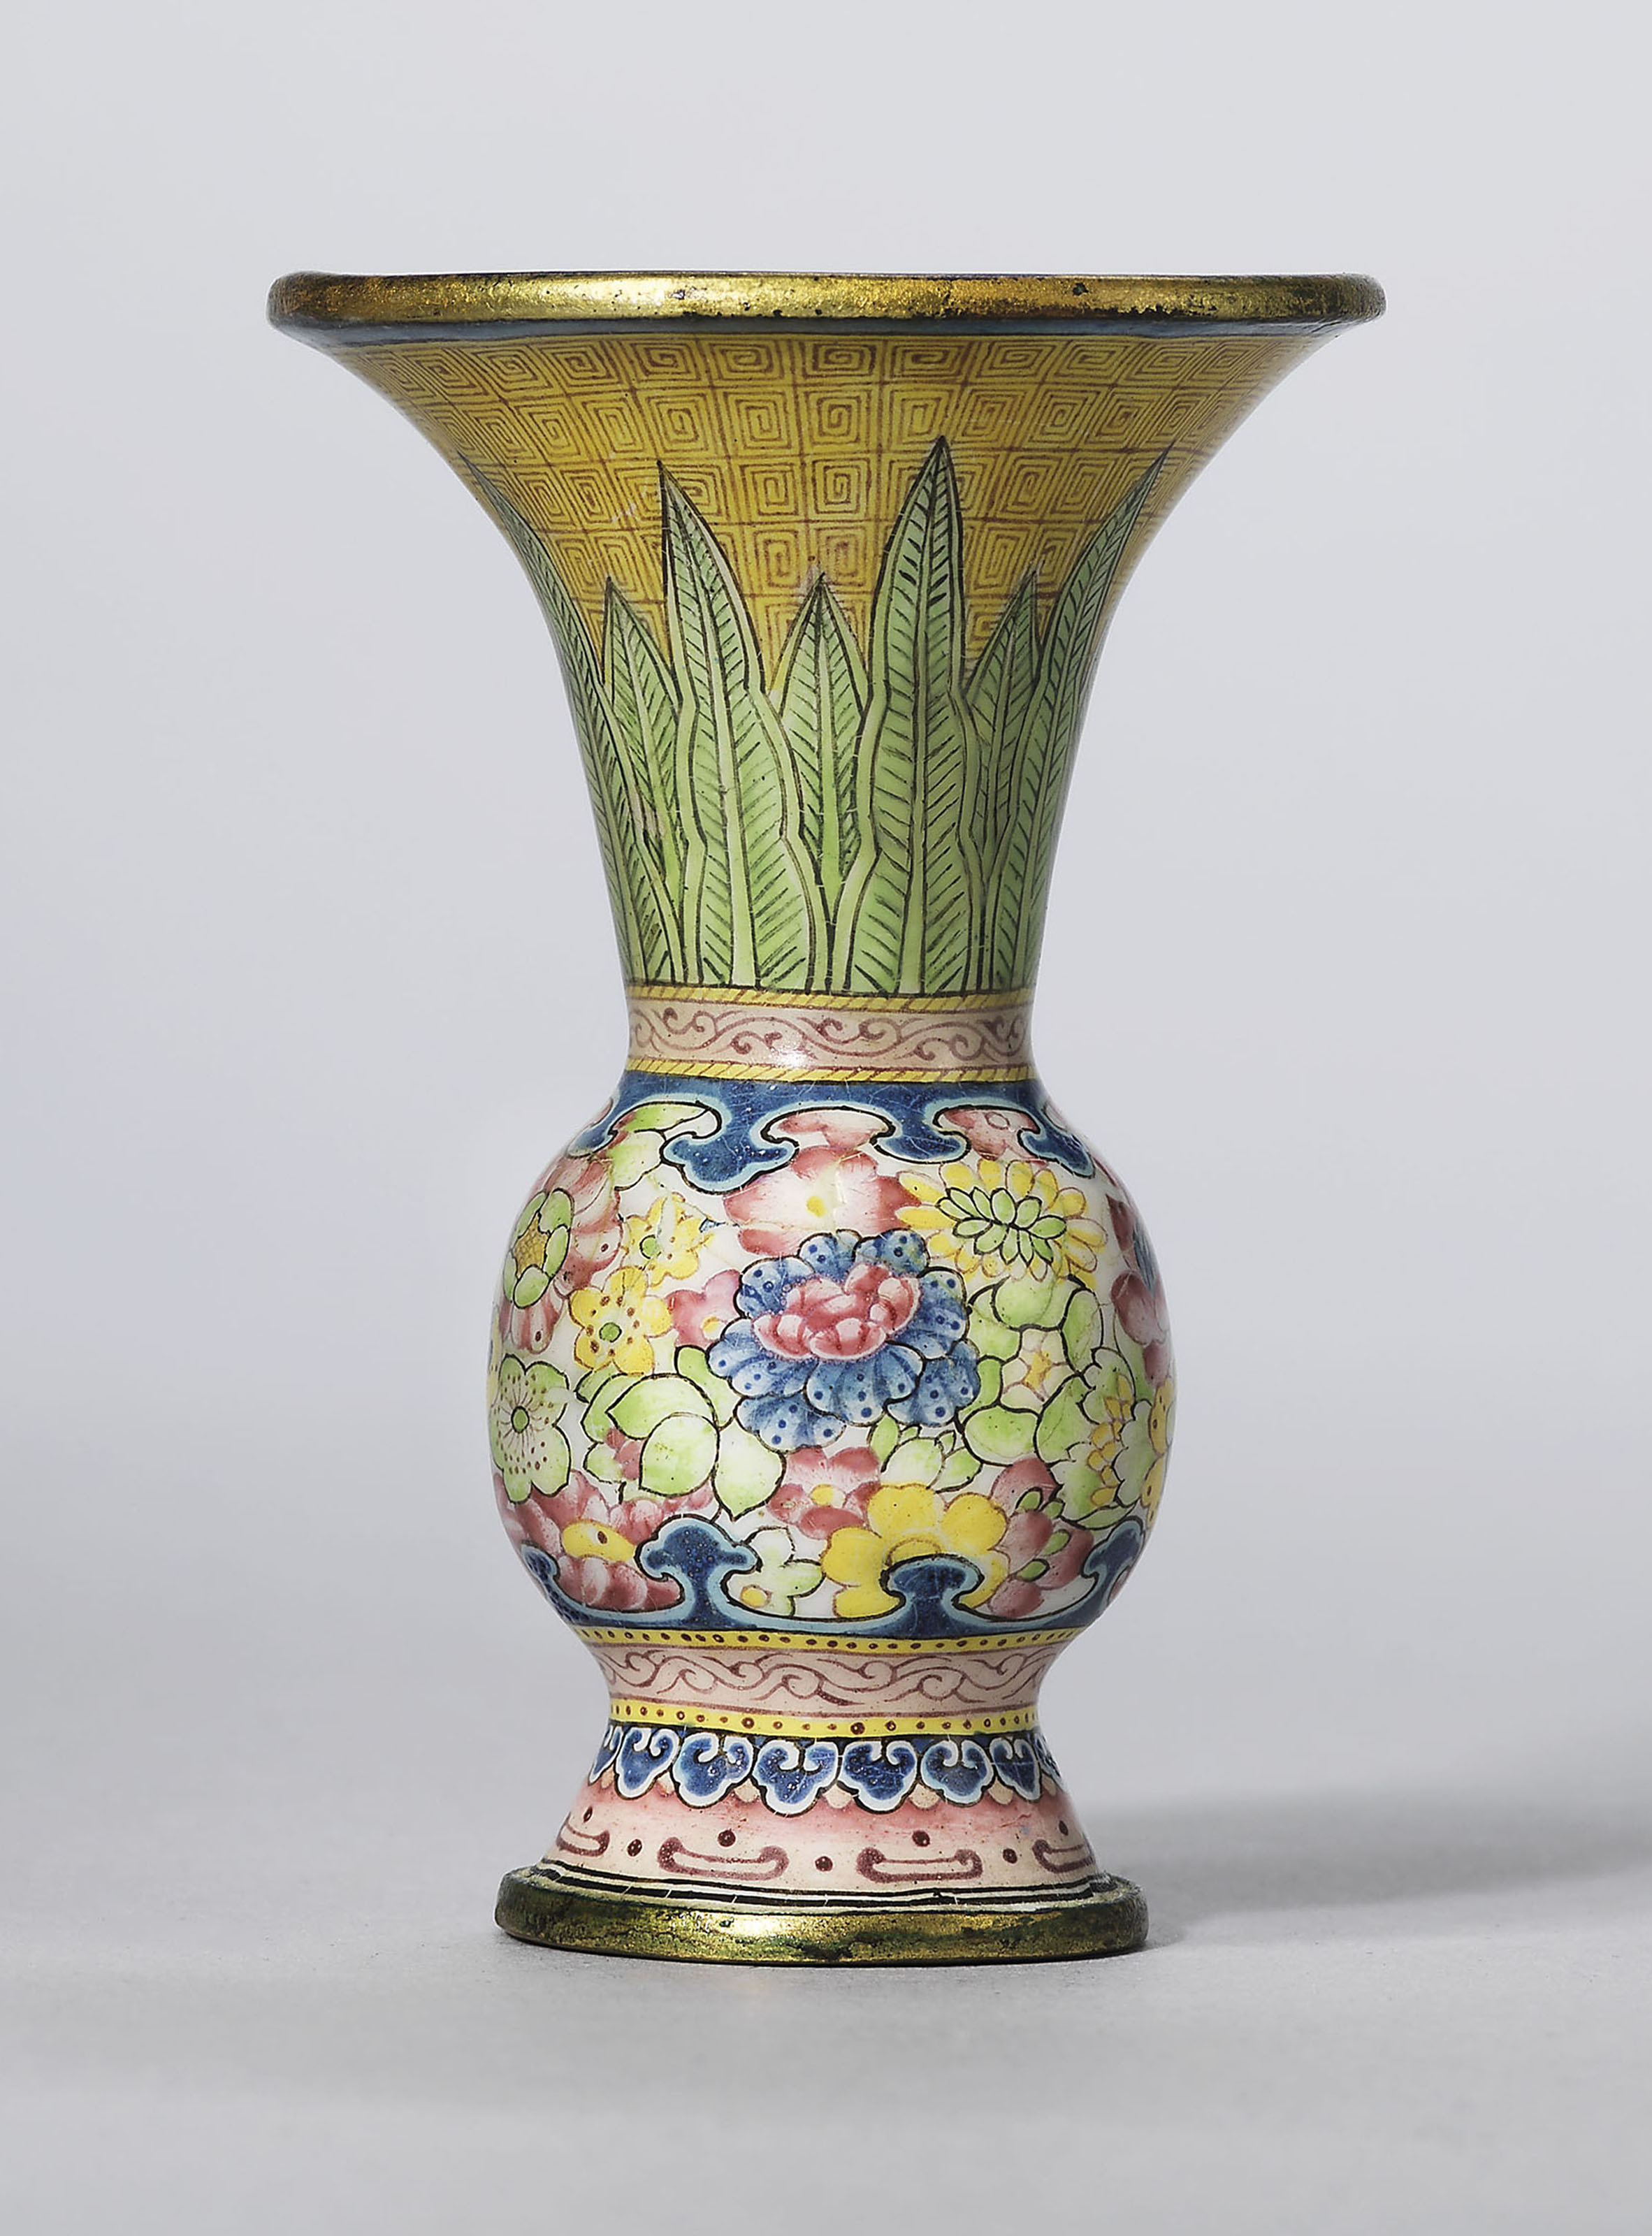 16 Stunning Tall Vases for Sale Cheap 2024 free download tall vases for sale cheap of a guide to the symbolism of flowers on chinese ceramics christies with regard to a rare painted enamel gu shaped miniature vase qianlong four character mark in